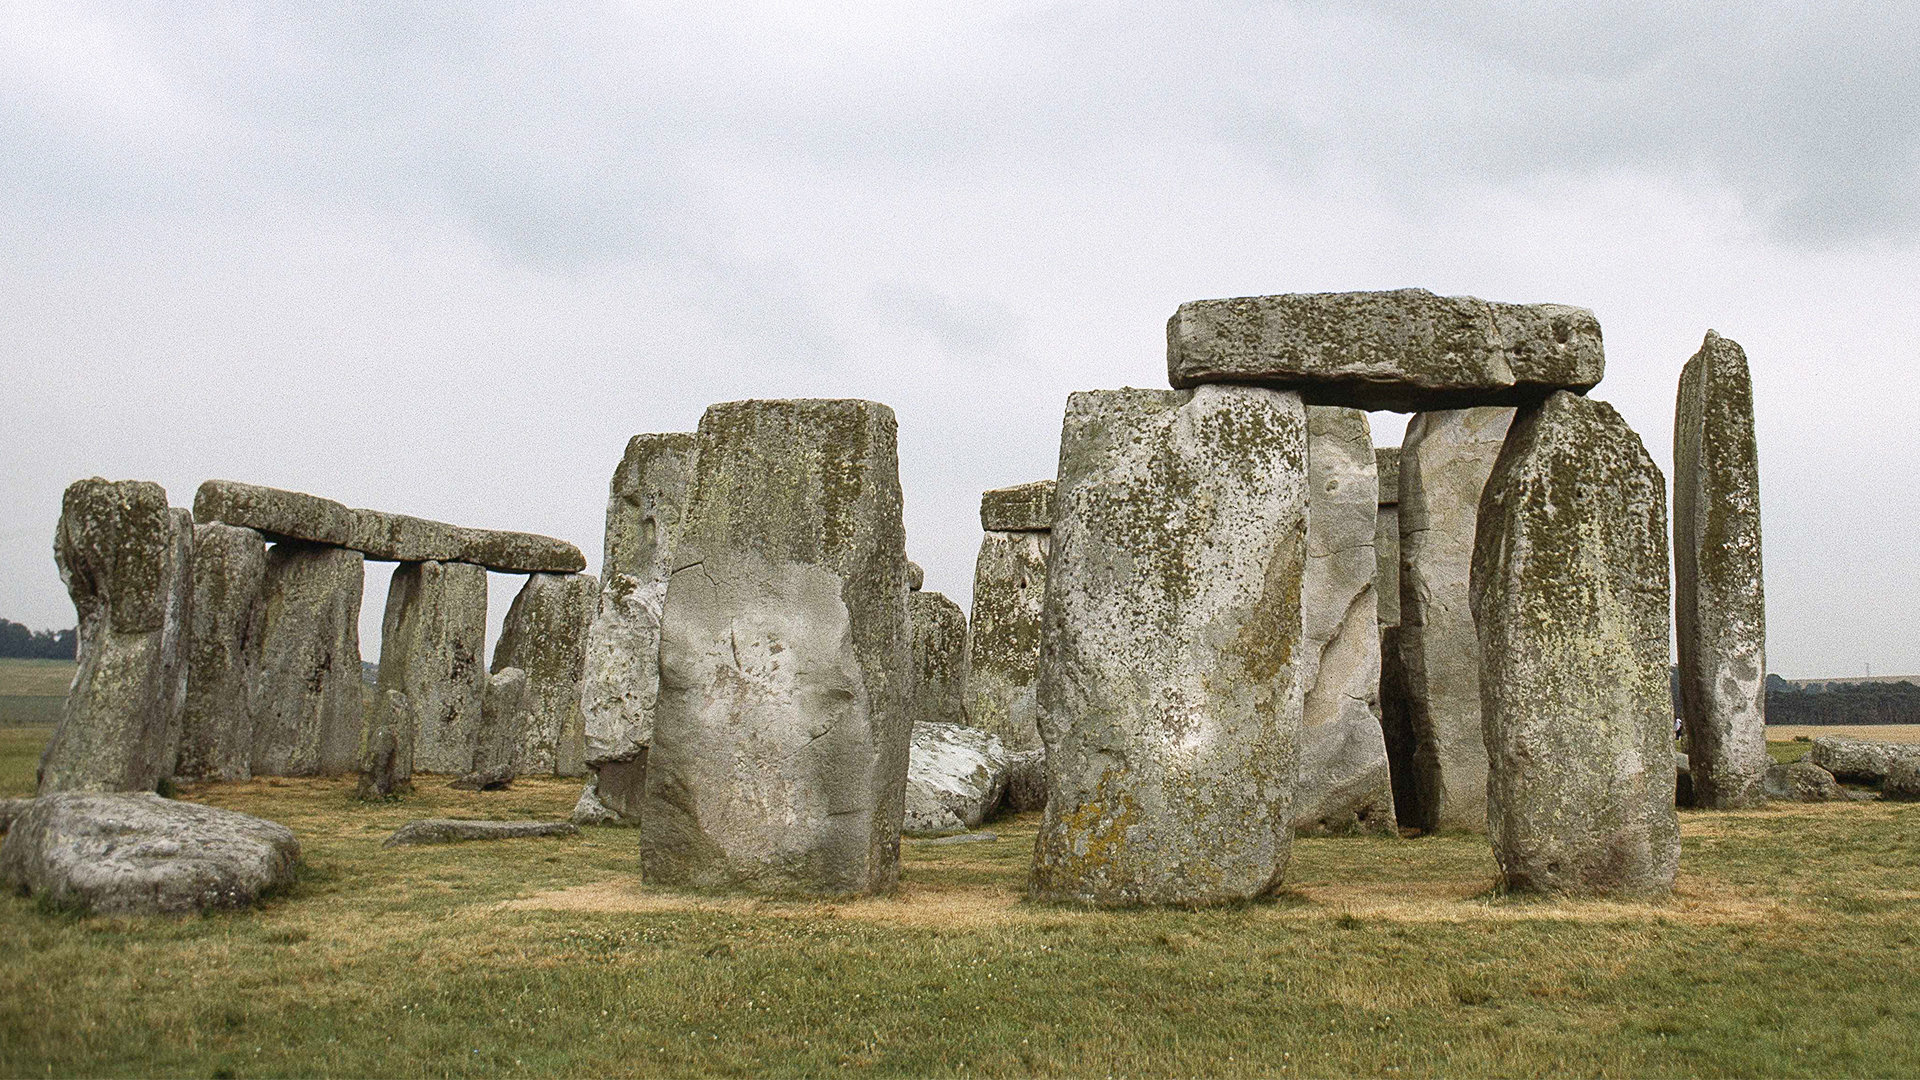 National Geographic Specials - Stonehenge Decoded